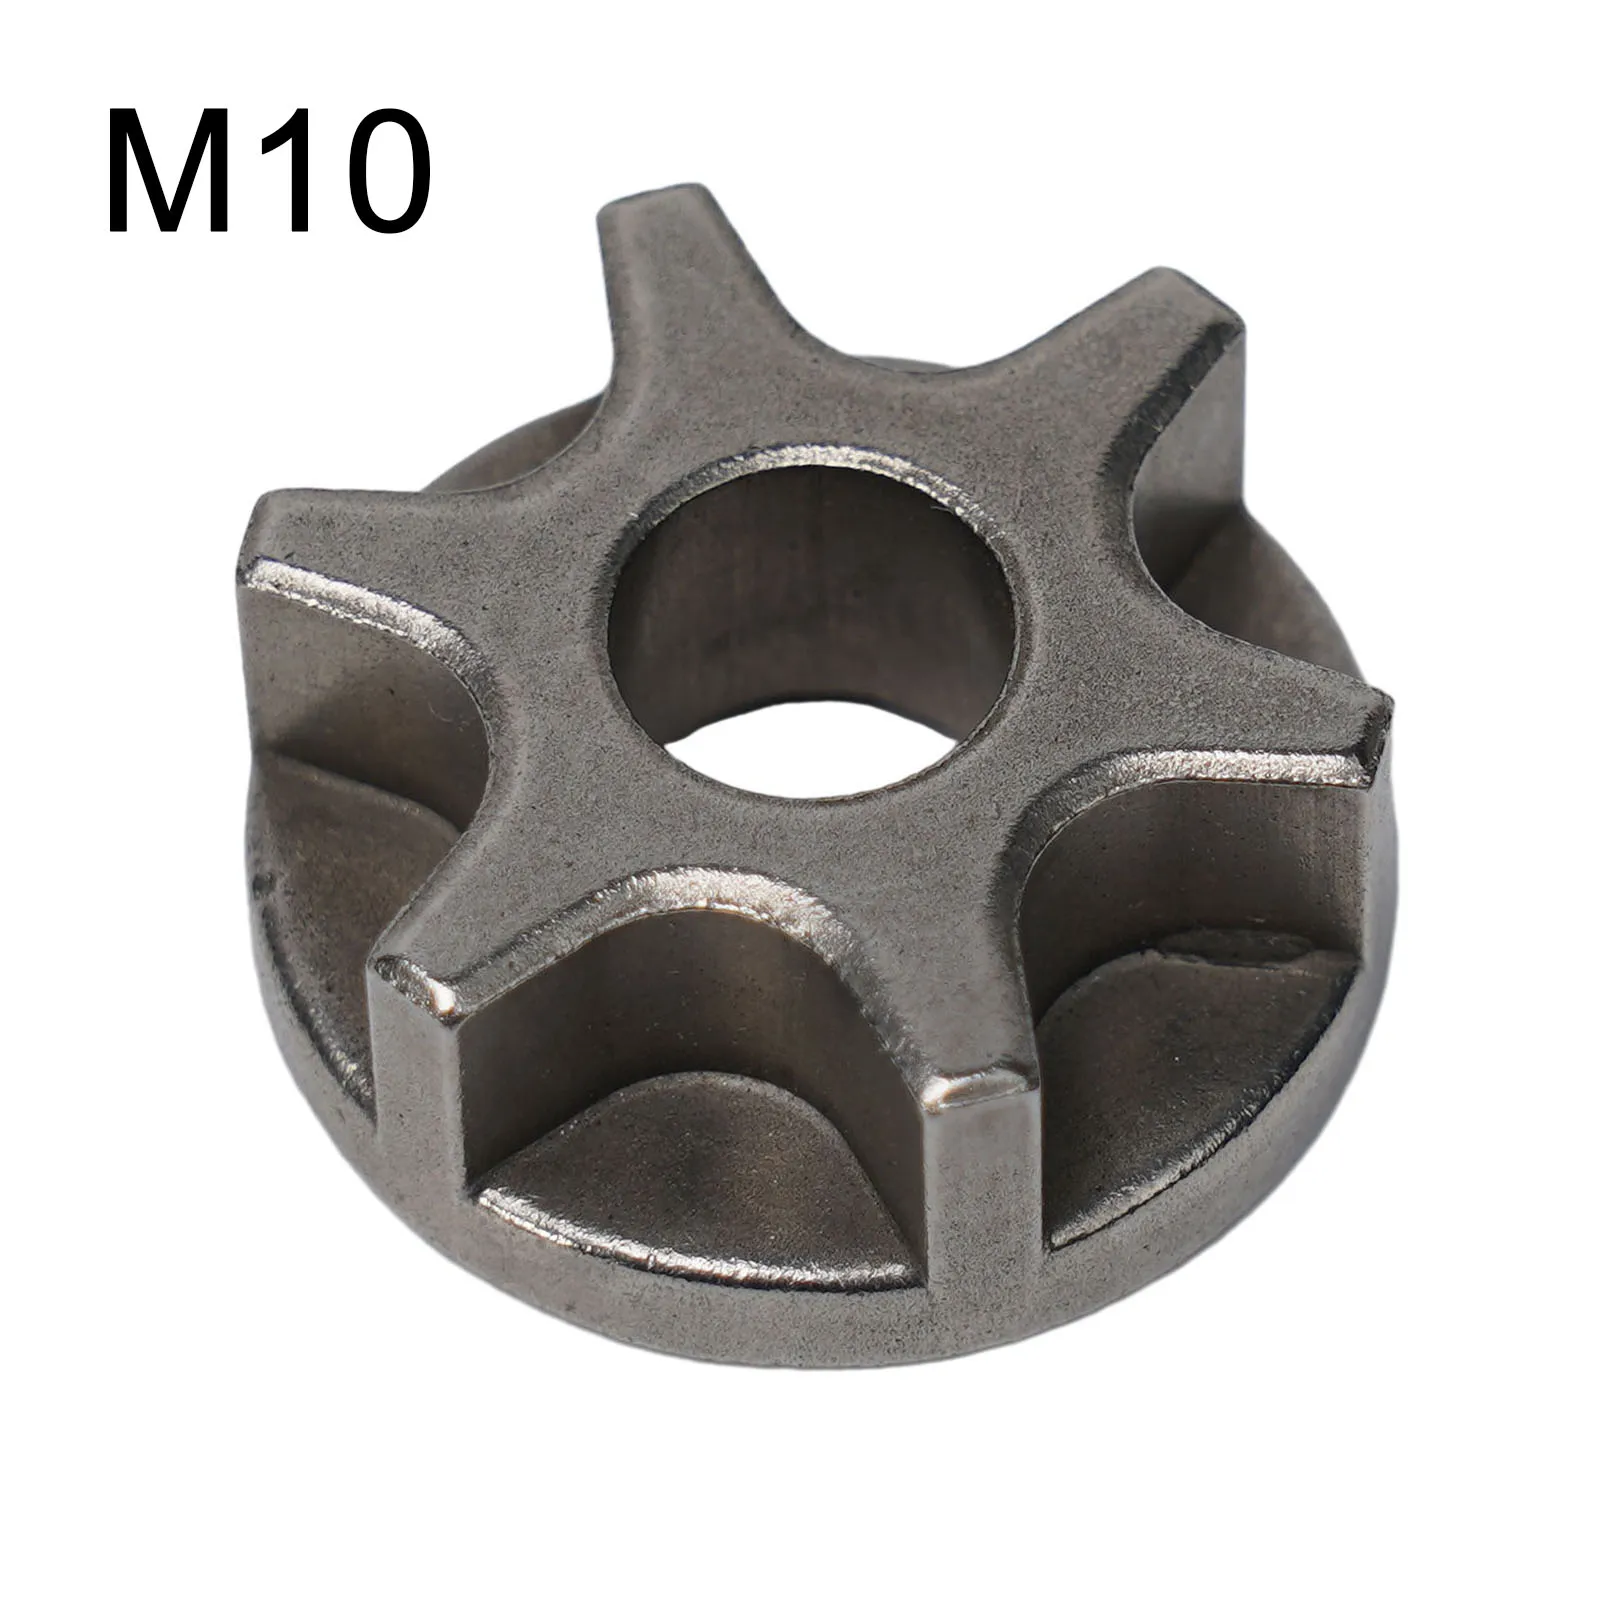 1pc M10 M14 M16 Sprocket Chain Saw Gear For 100 115 125 150 180 Angle Grinder Replacement Gear Chainsaw Bracket Part part 024 026 clutch cover 028 for stihl chainsaw 034 036 038 039 bar sprocket 044 046 066 ms240 ms260 gray ms362